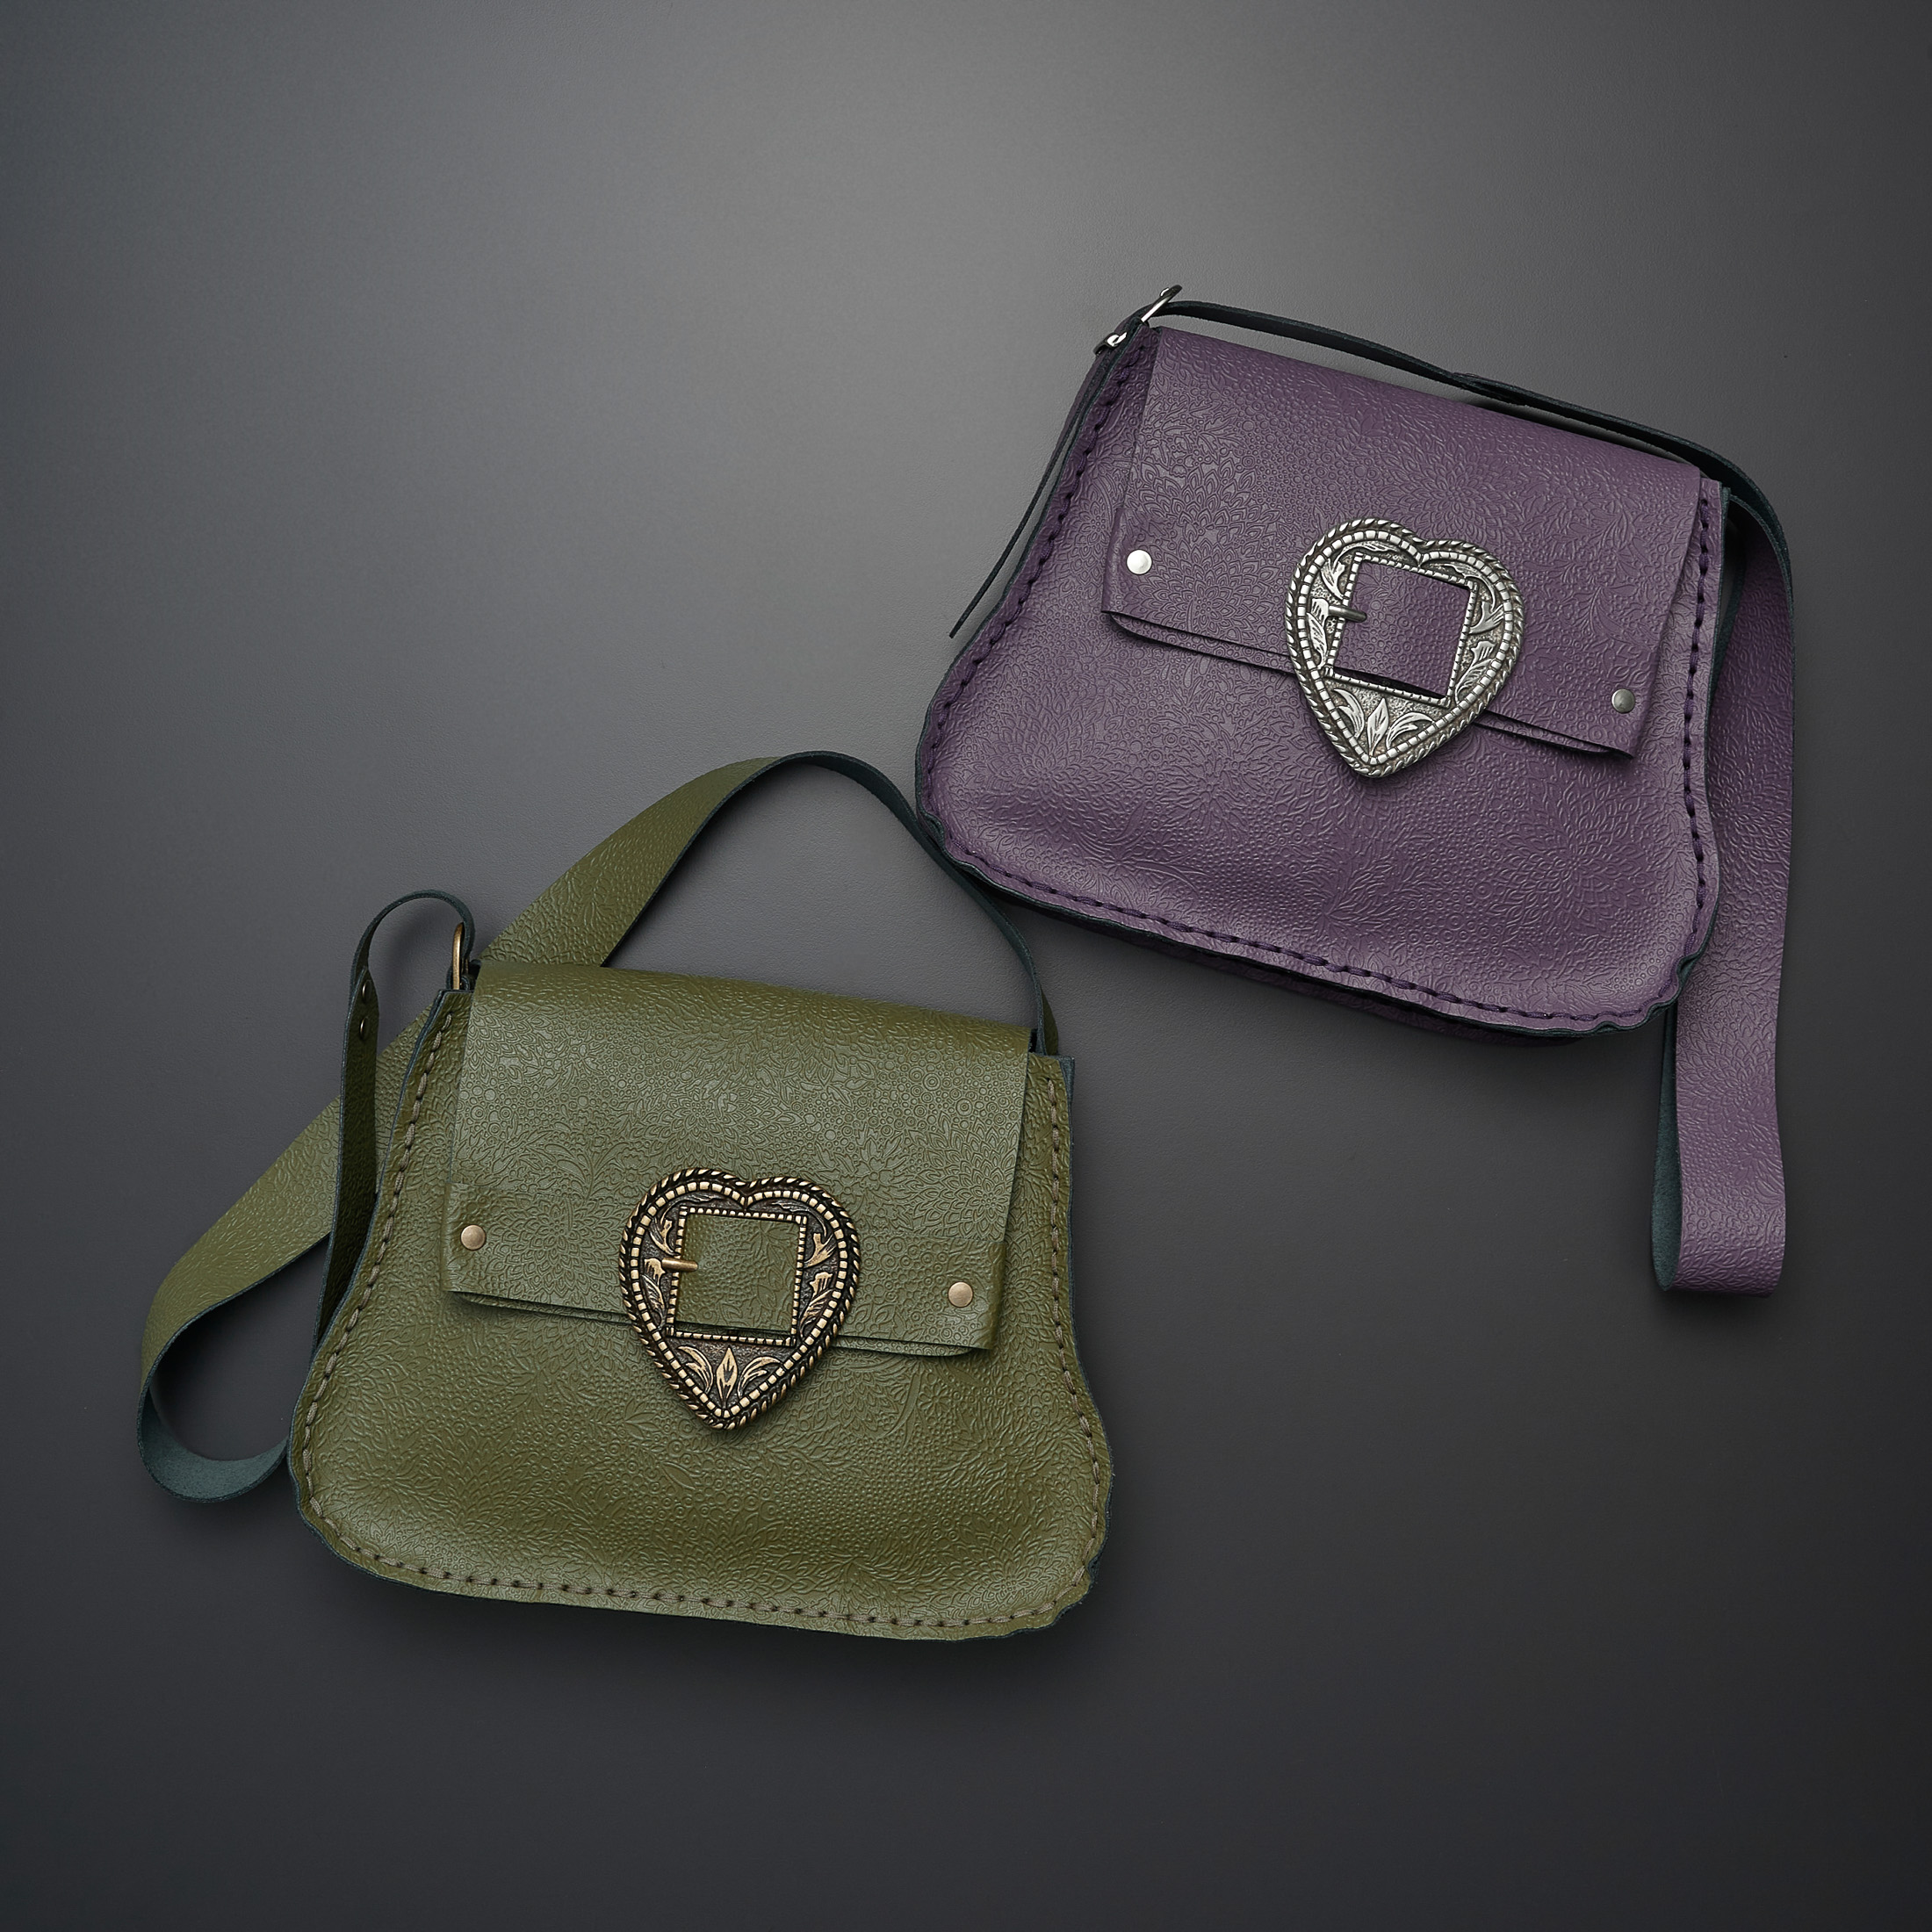 Individual Artleather The Power of Love purple bag